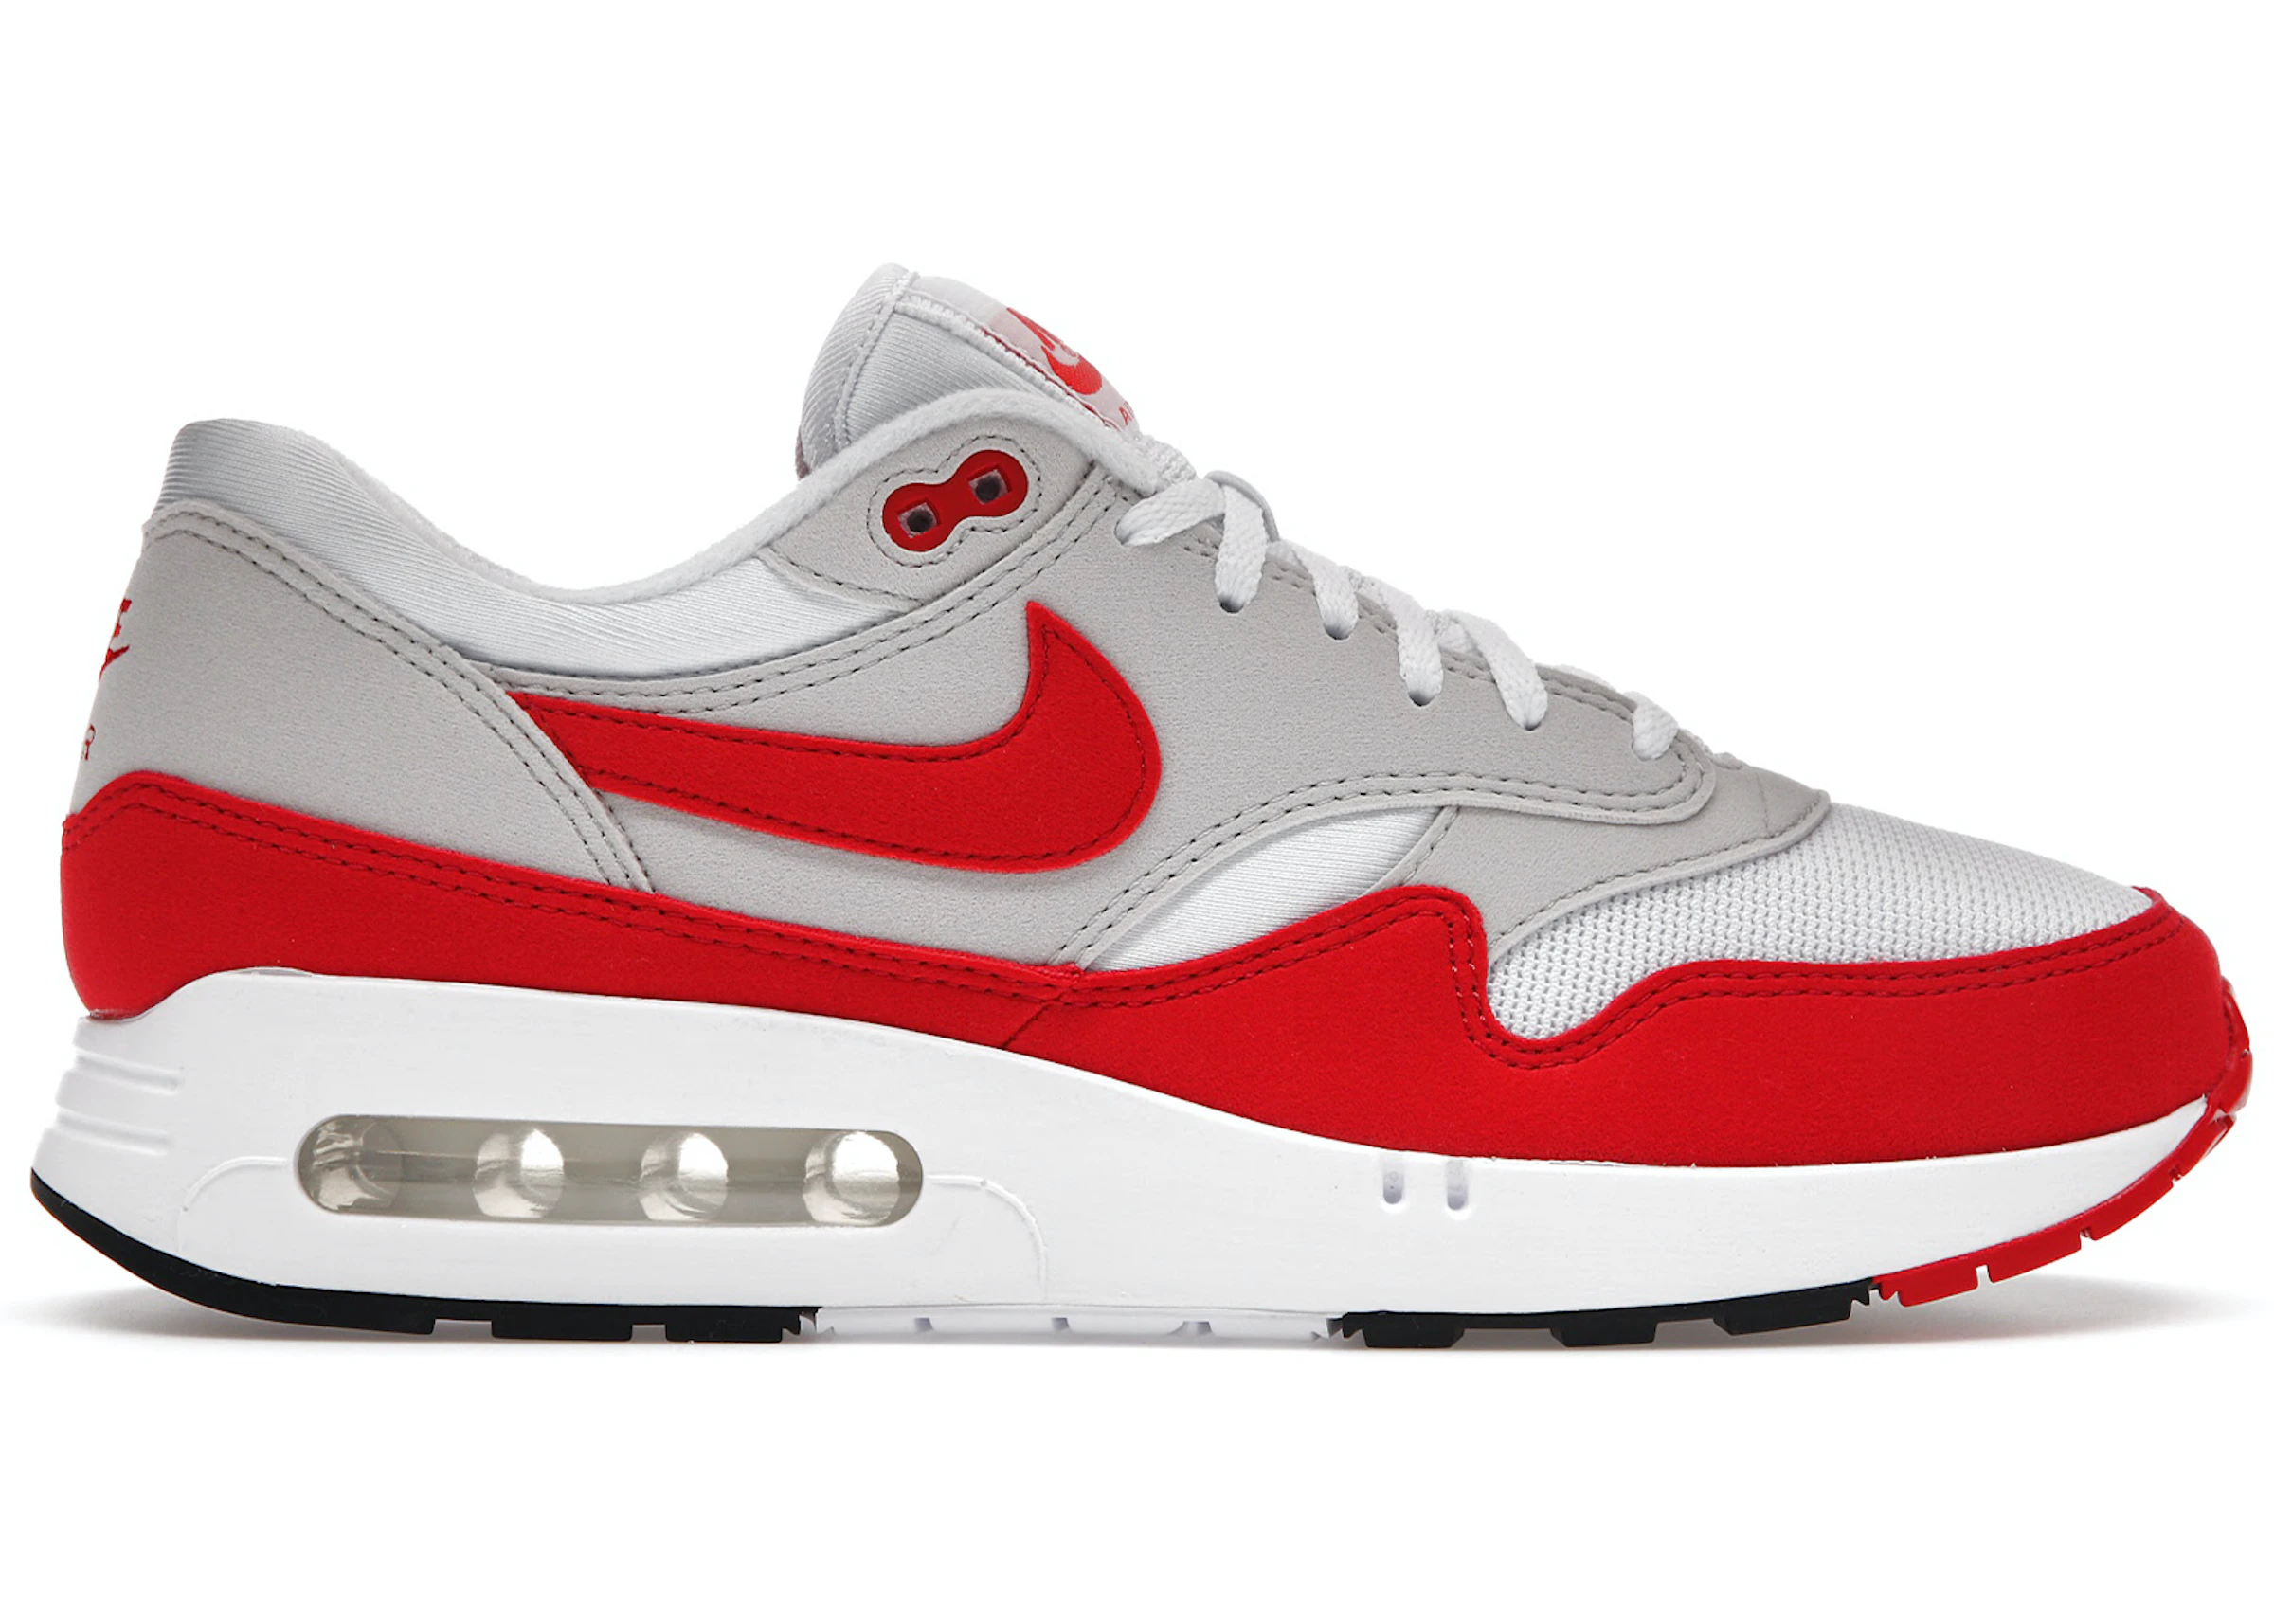 Cataract Punt temperen Buy Nike Air Max 1 Shoes & New Sneakers - StockX